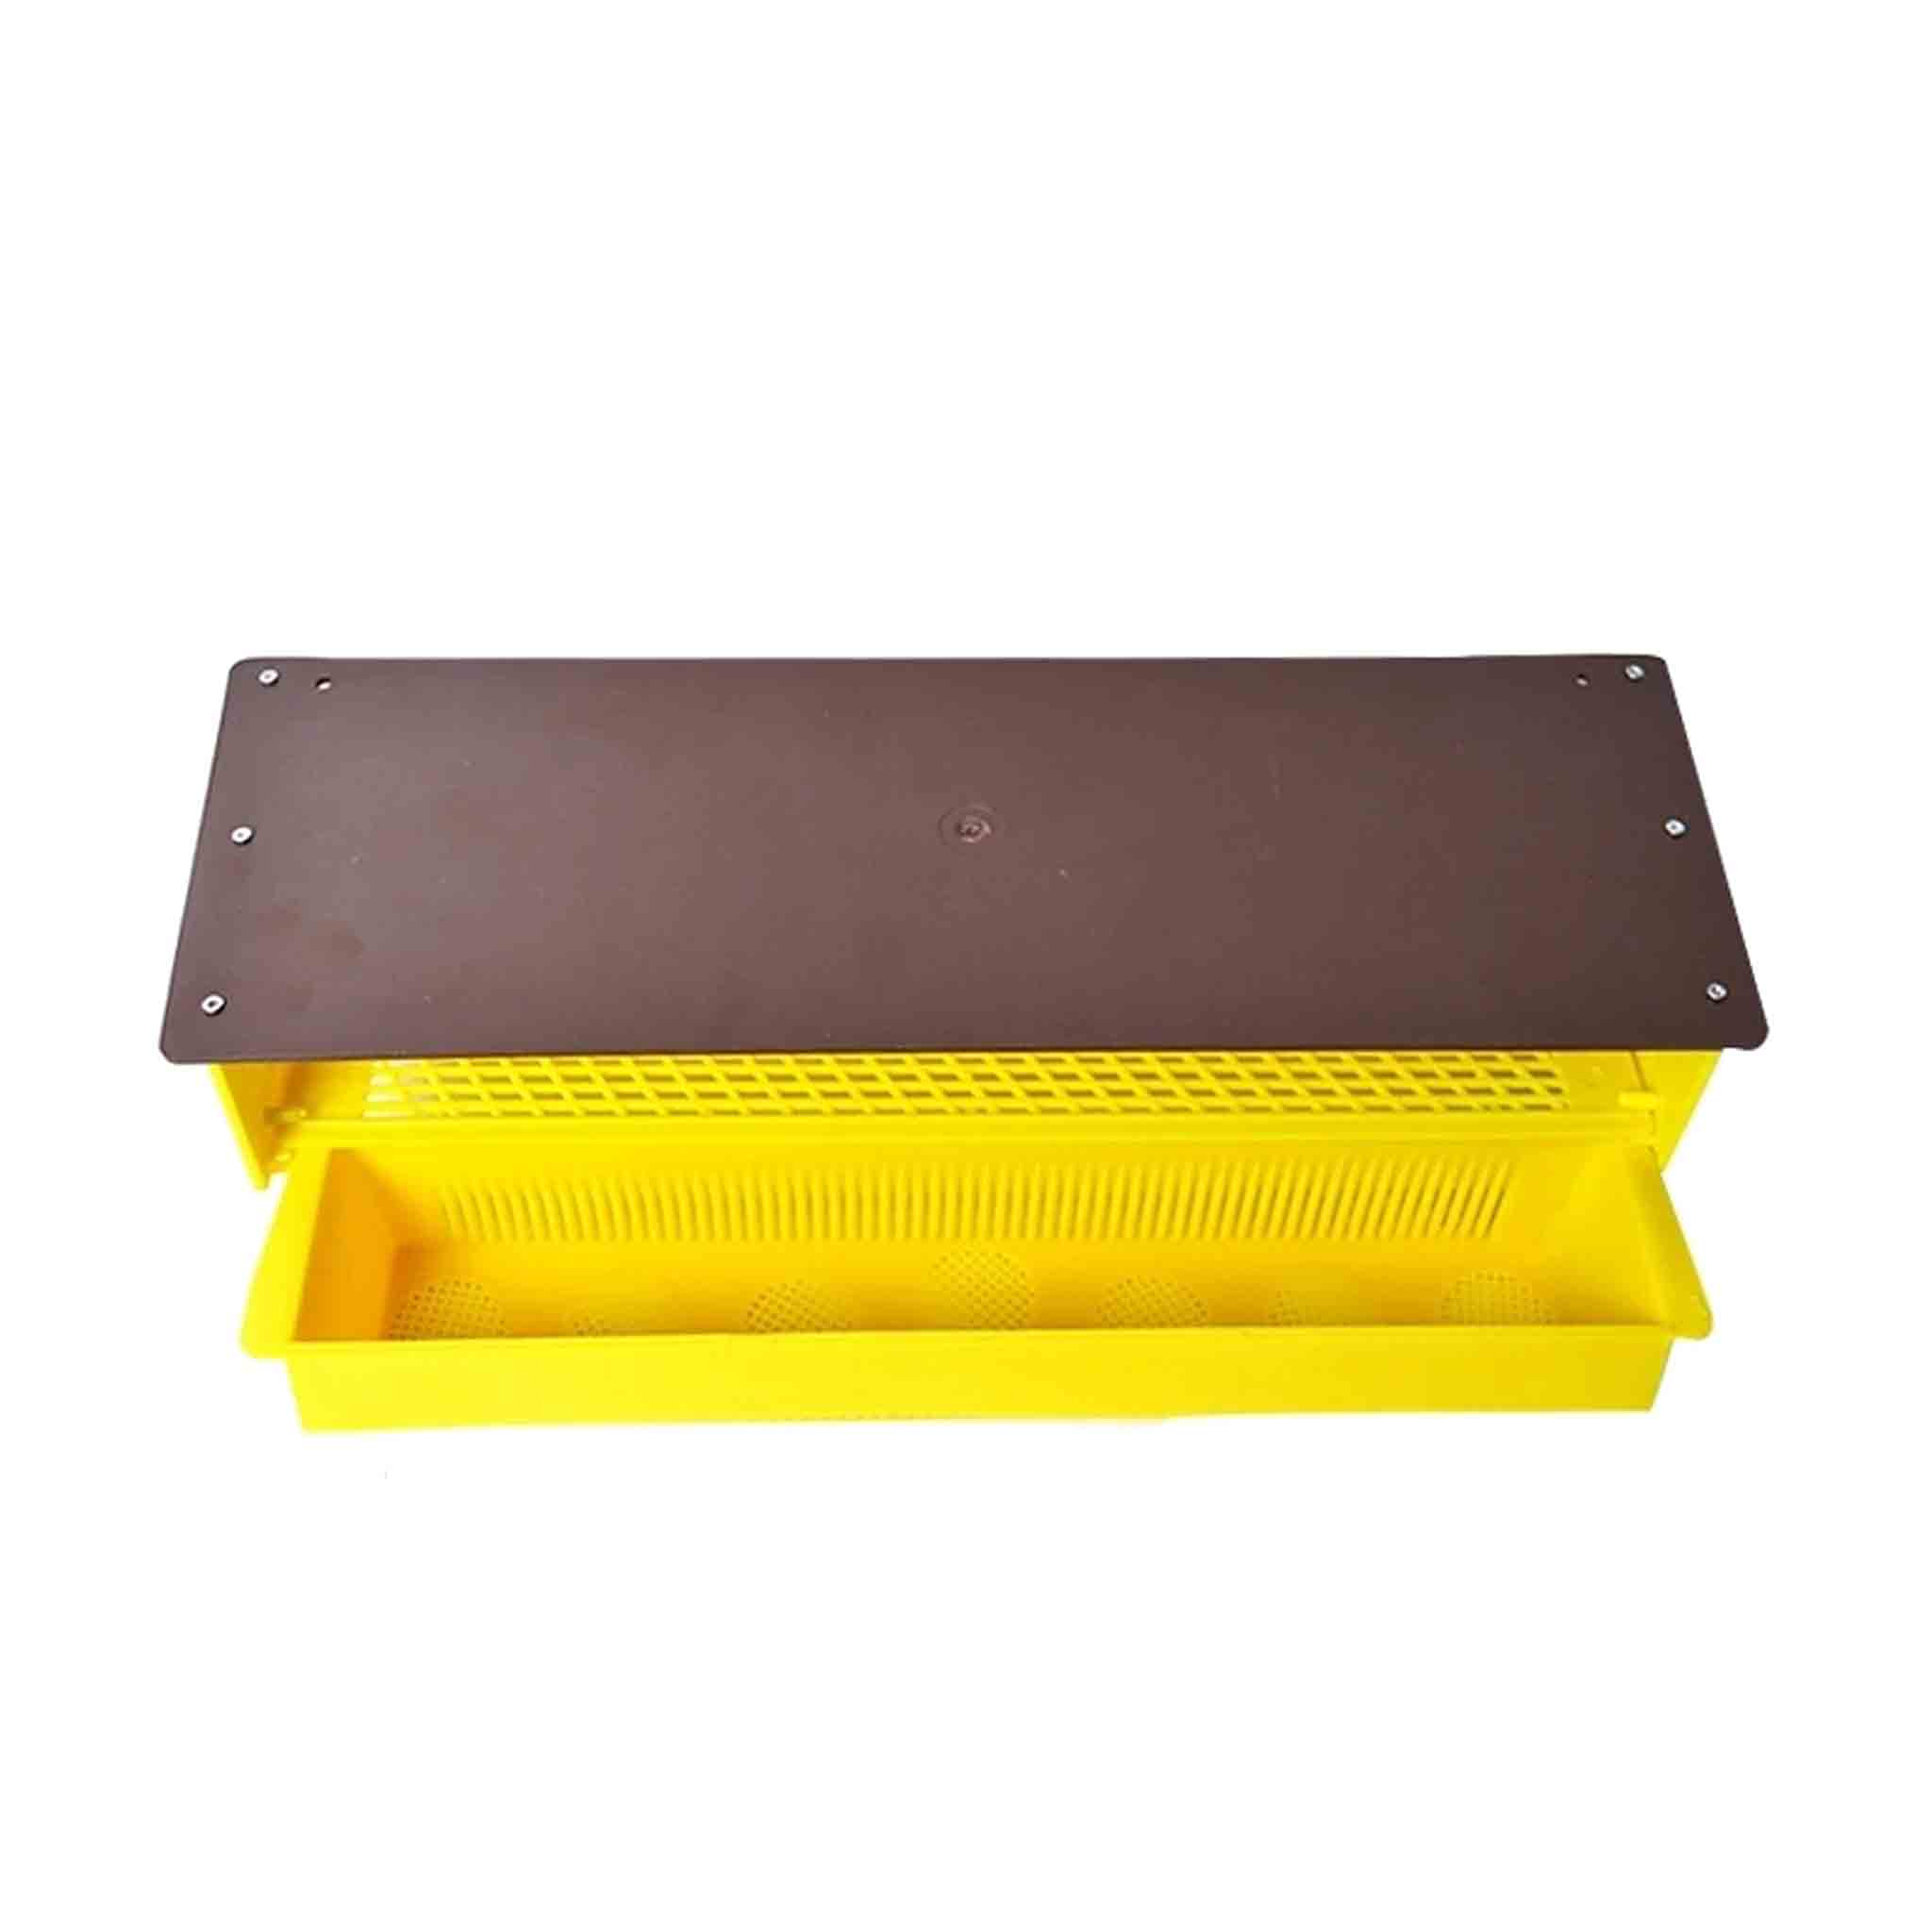 Removable Plastic Ventilated Pollen Trap/Collector with Pollen Collecting Tray - Health collection by Buzzbee Beekeeping Supplies